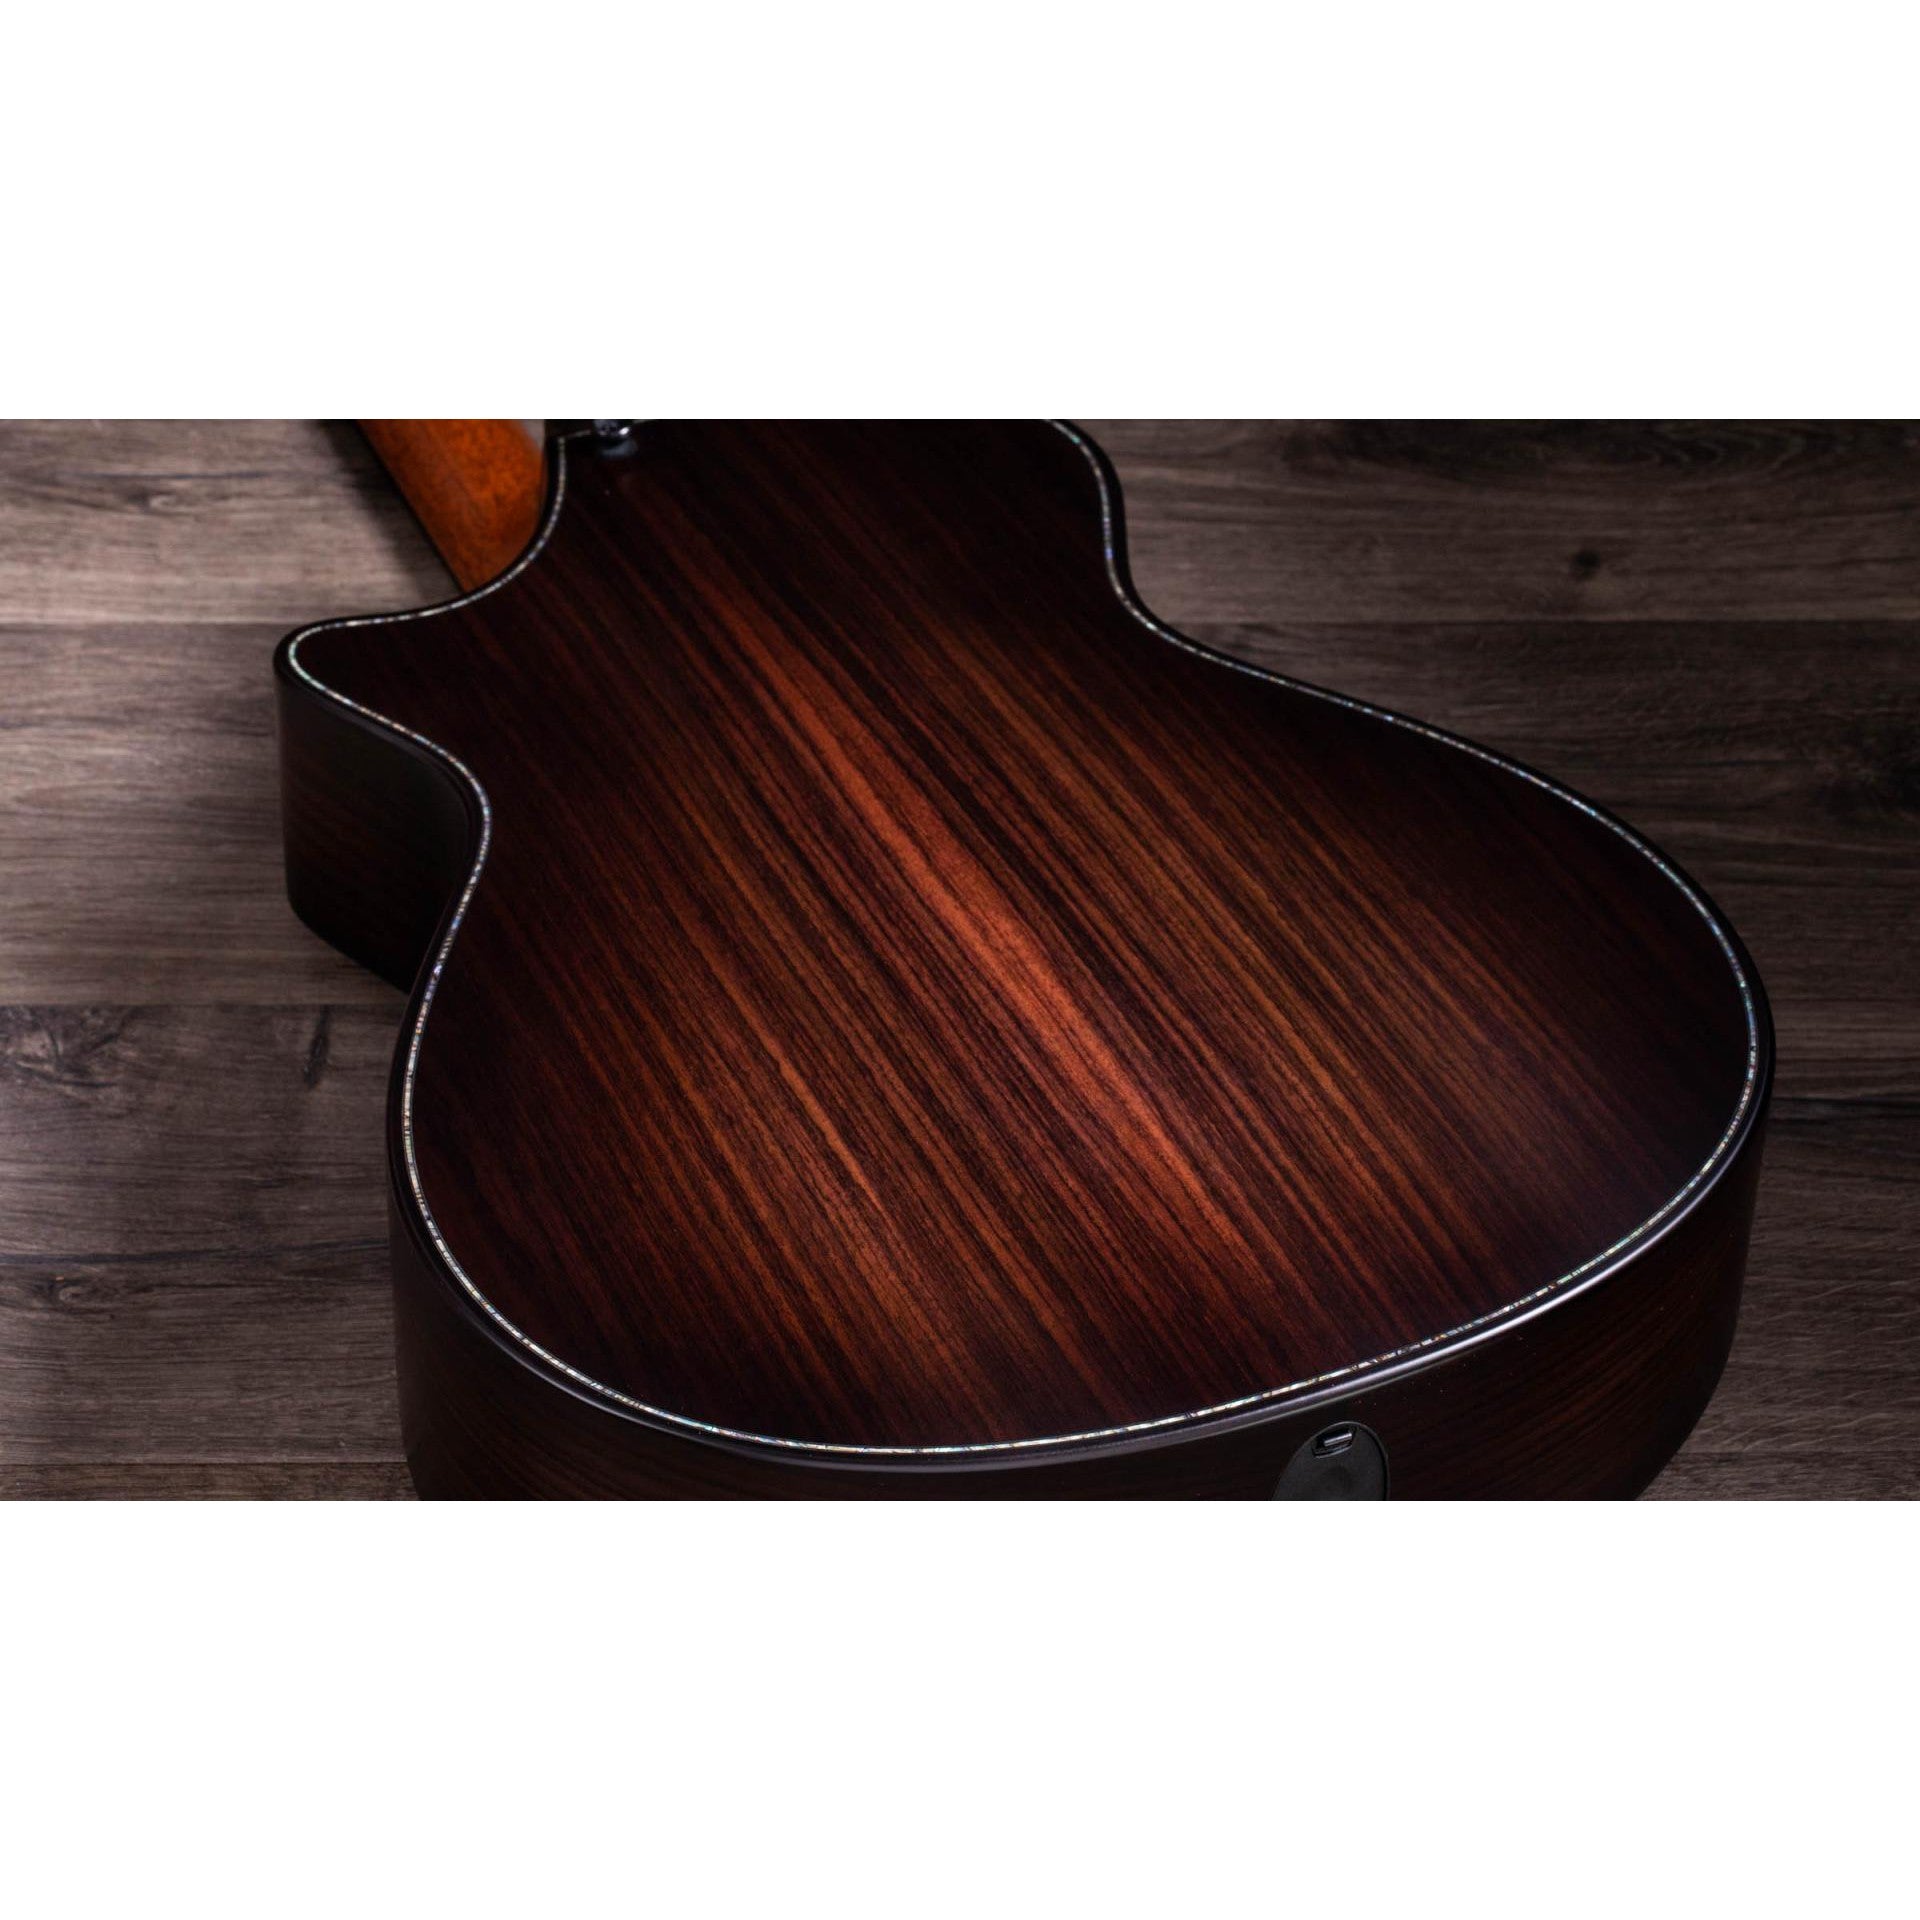 Đàn Guitar Acoustic Taylor 912CE WHB Builder's Edition Indian Rosewood - Grand Concert - Việt Music